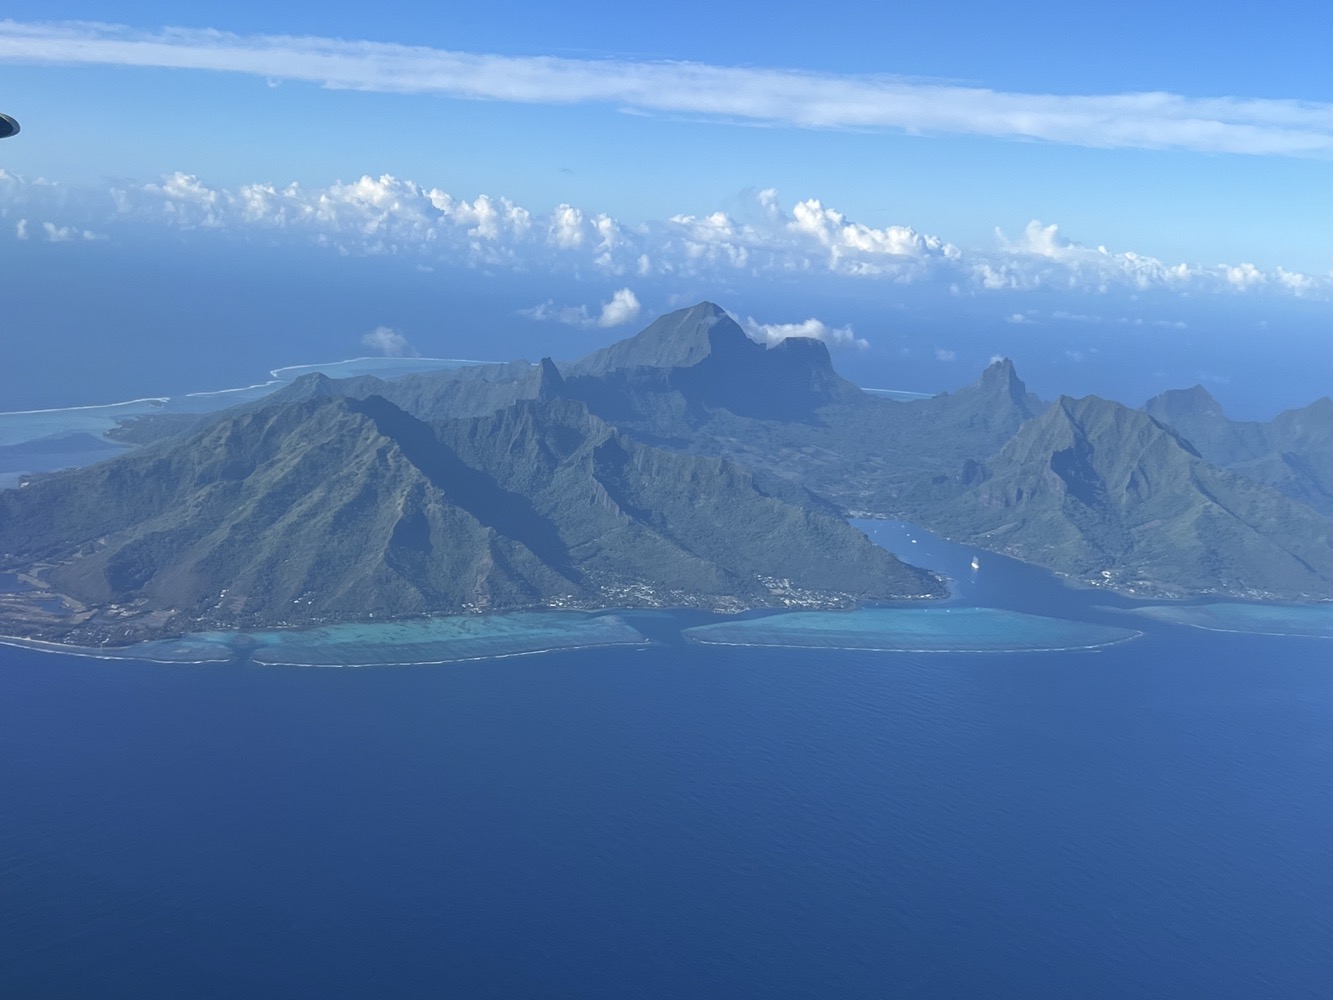 an aerial view of a large island